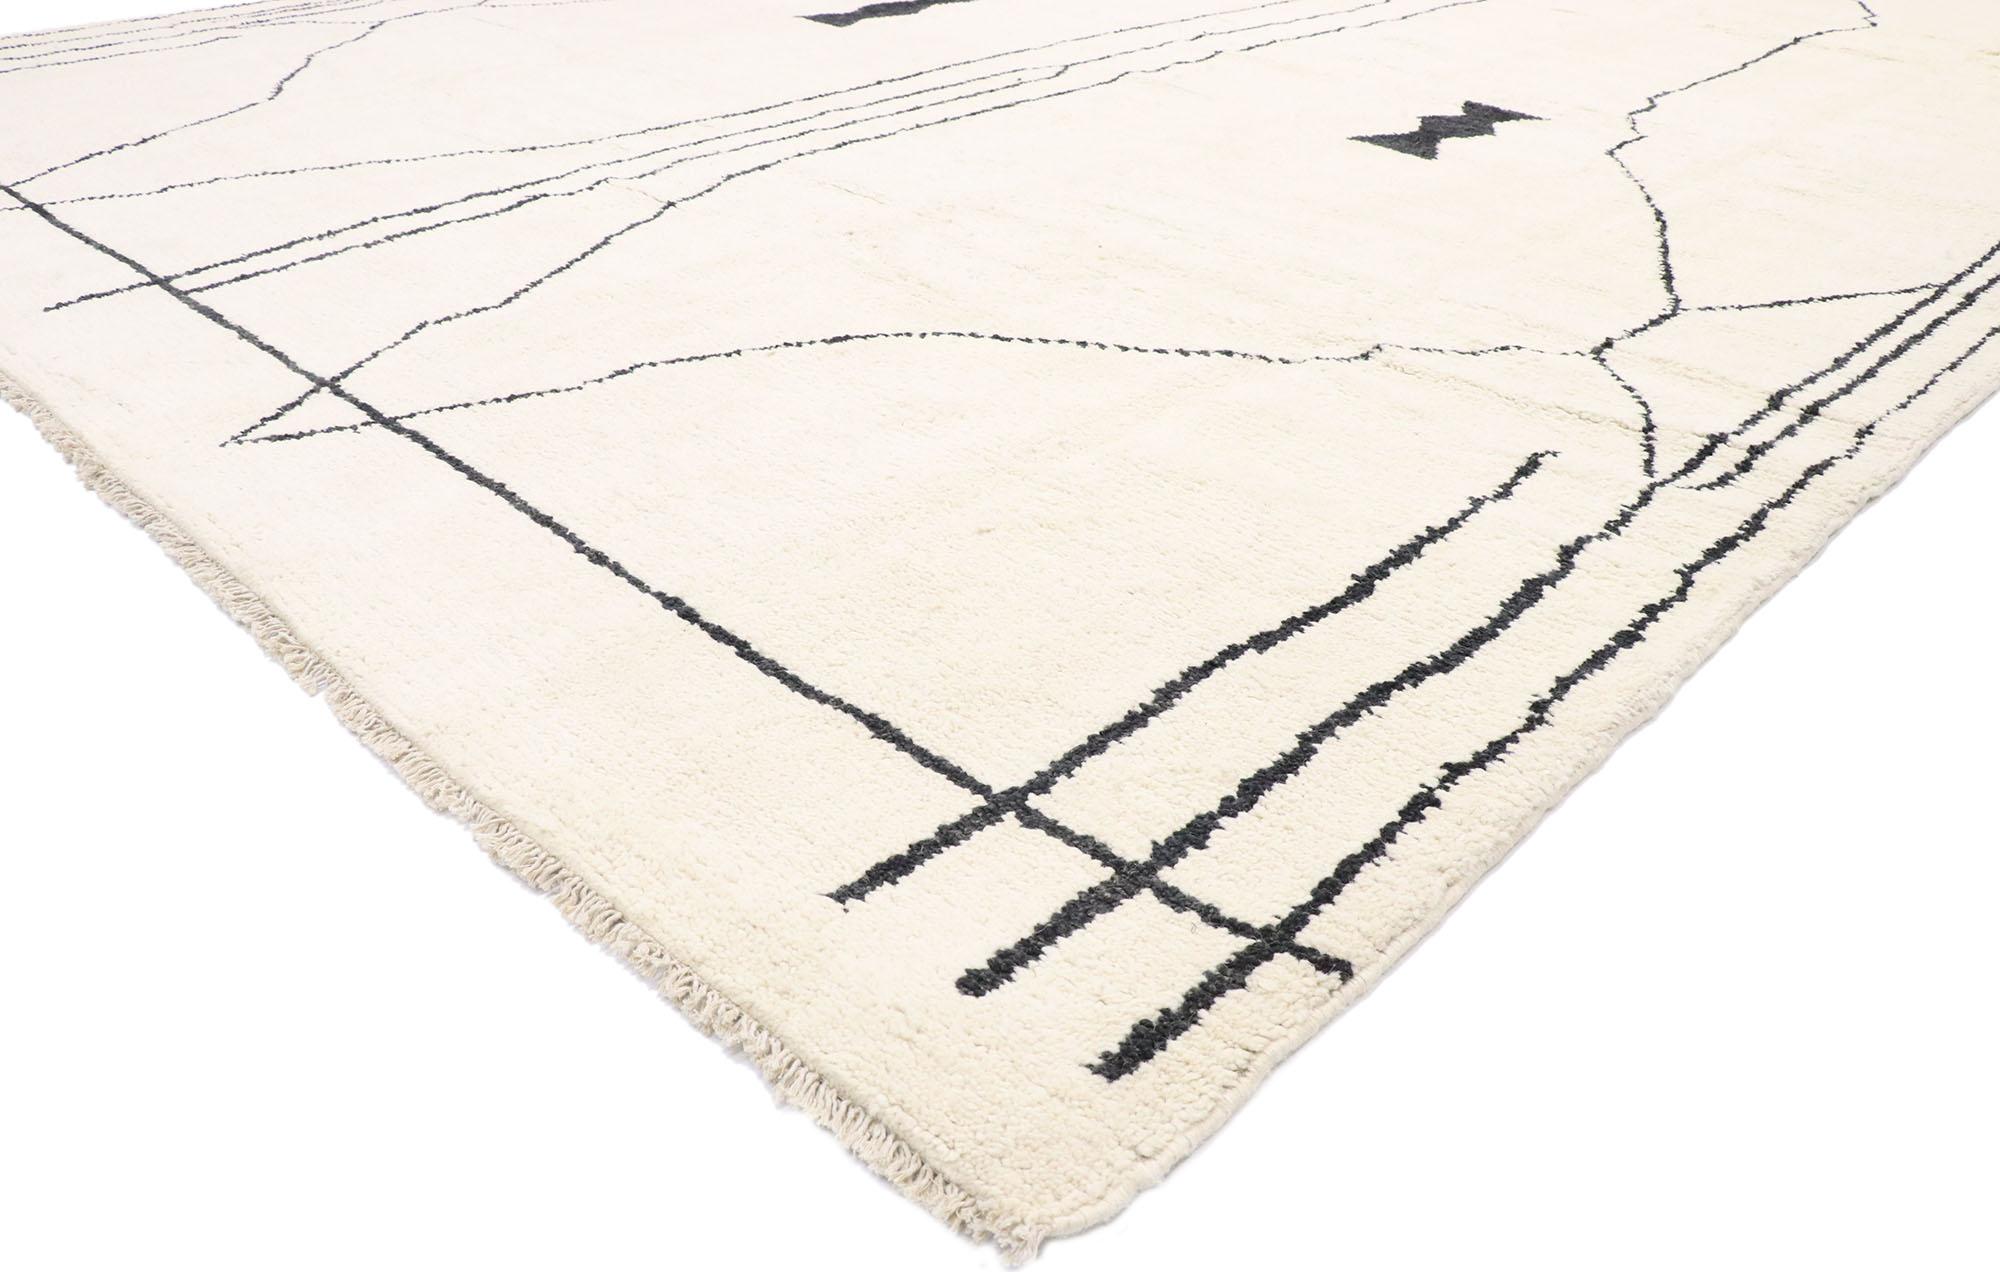 80640 new contemporary Moroccan rug with Modern Tribal style. This hand knotted wool contemporary Moroccan area rug with line art design and tribal style features contrasting black lines running the length of the ivory backdrop and dotted with two